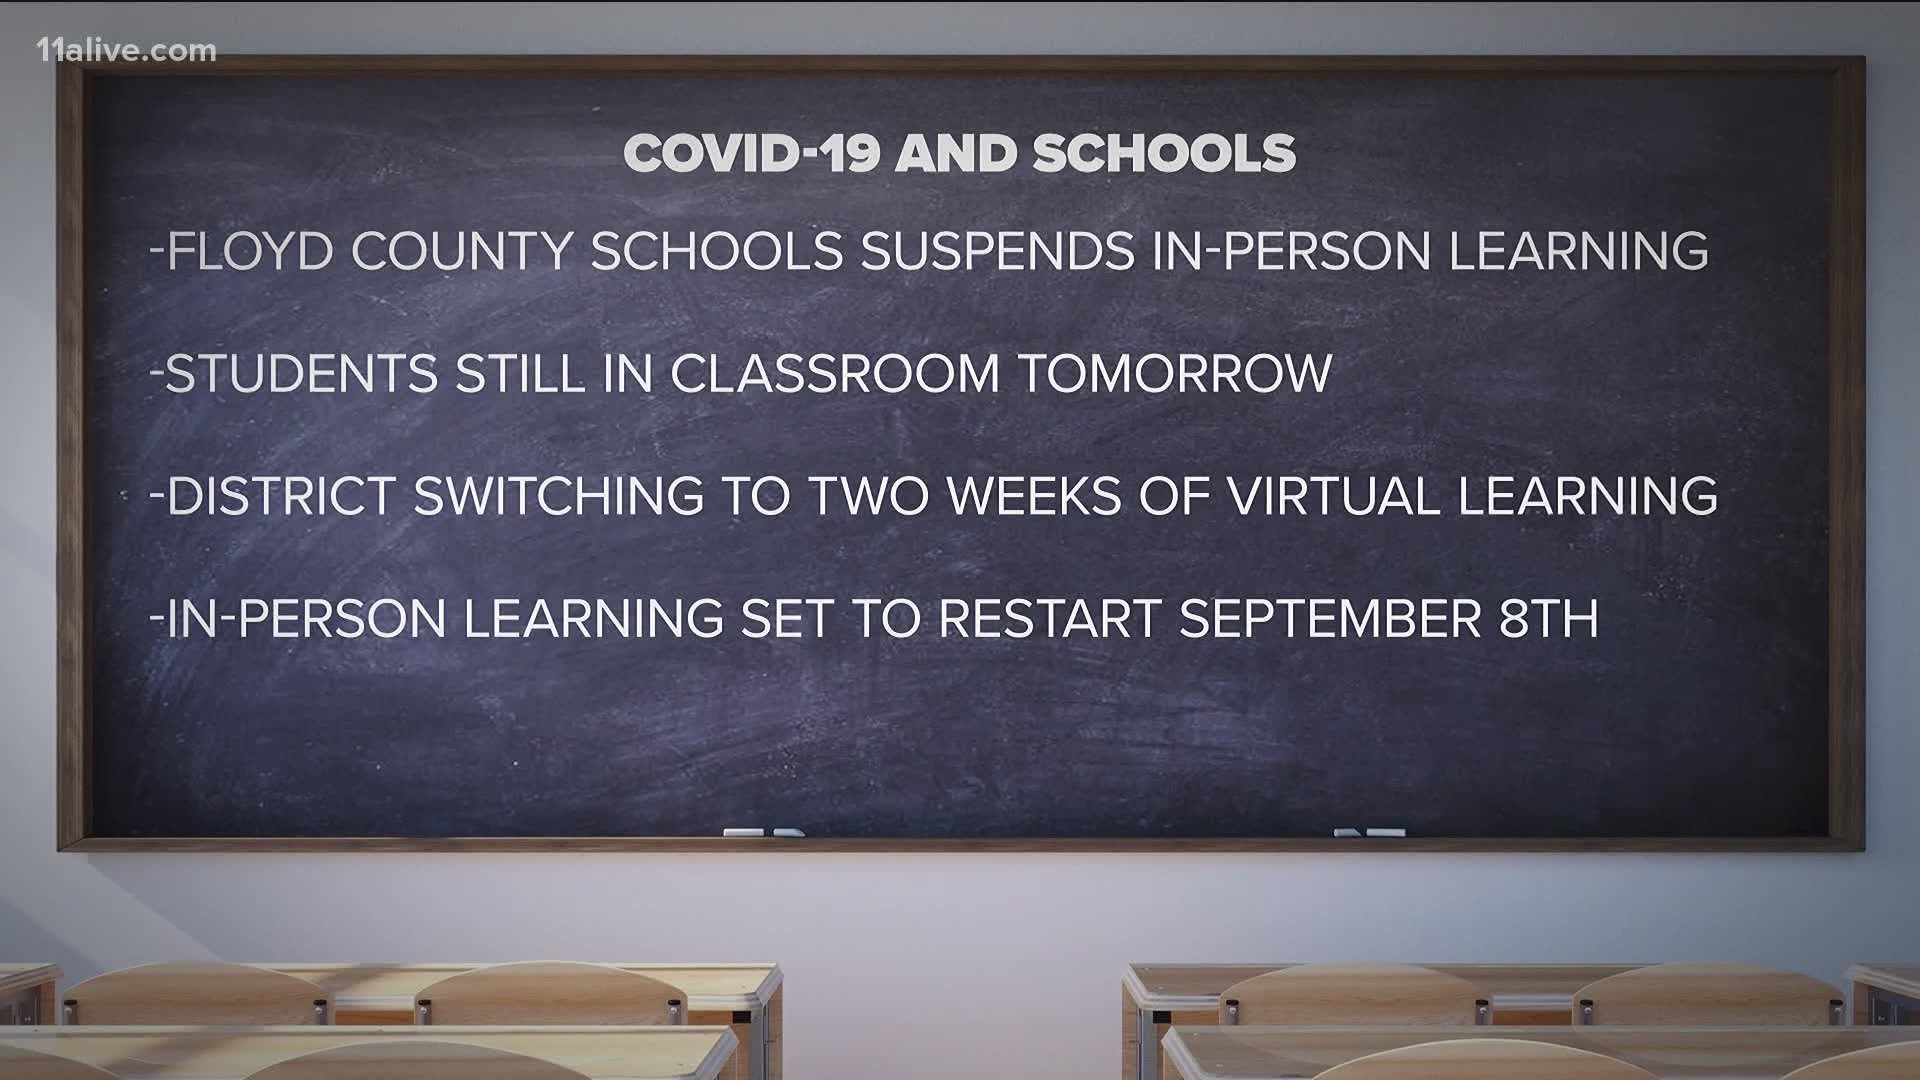 The decision came after more than 10 COVID-19 cases were confirmed in county schools.